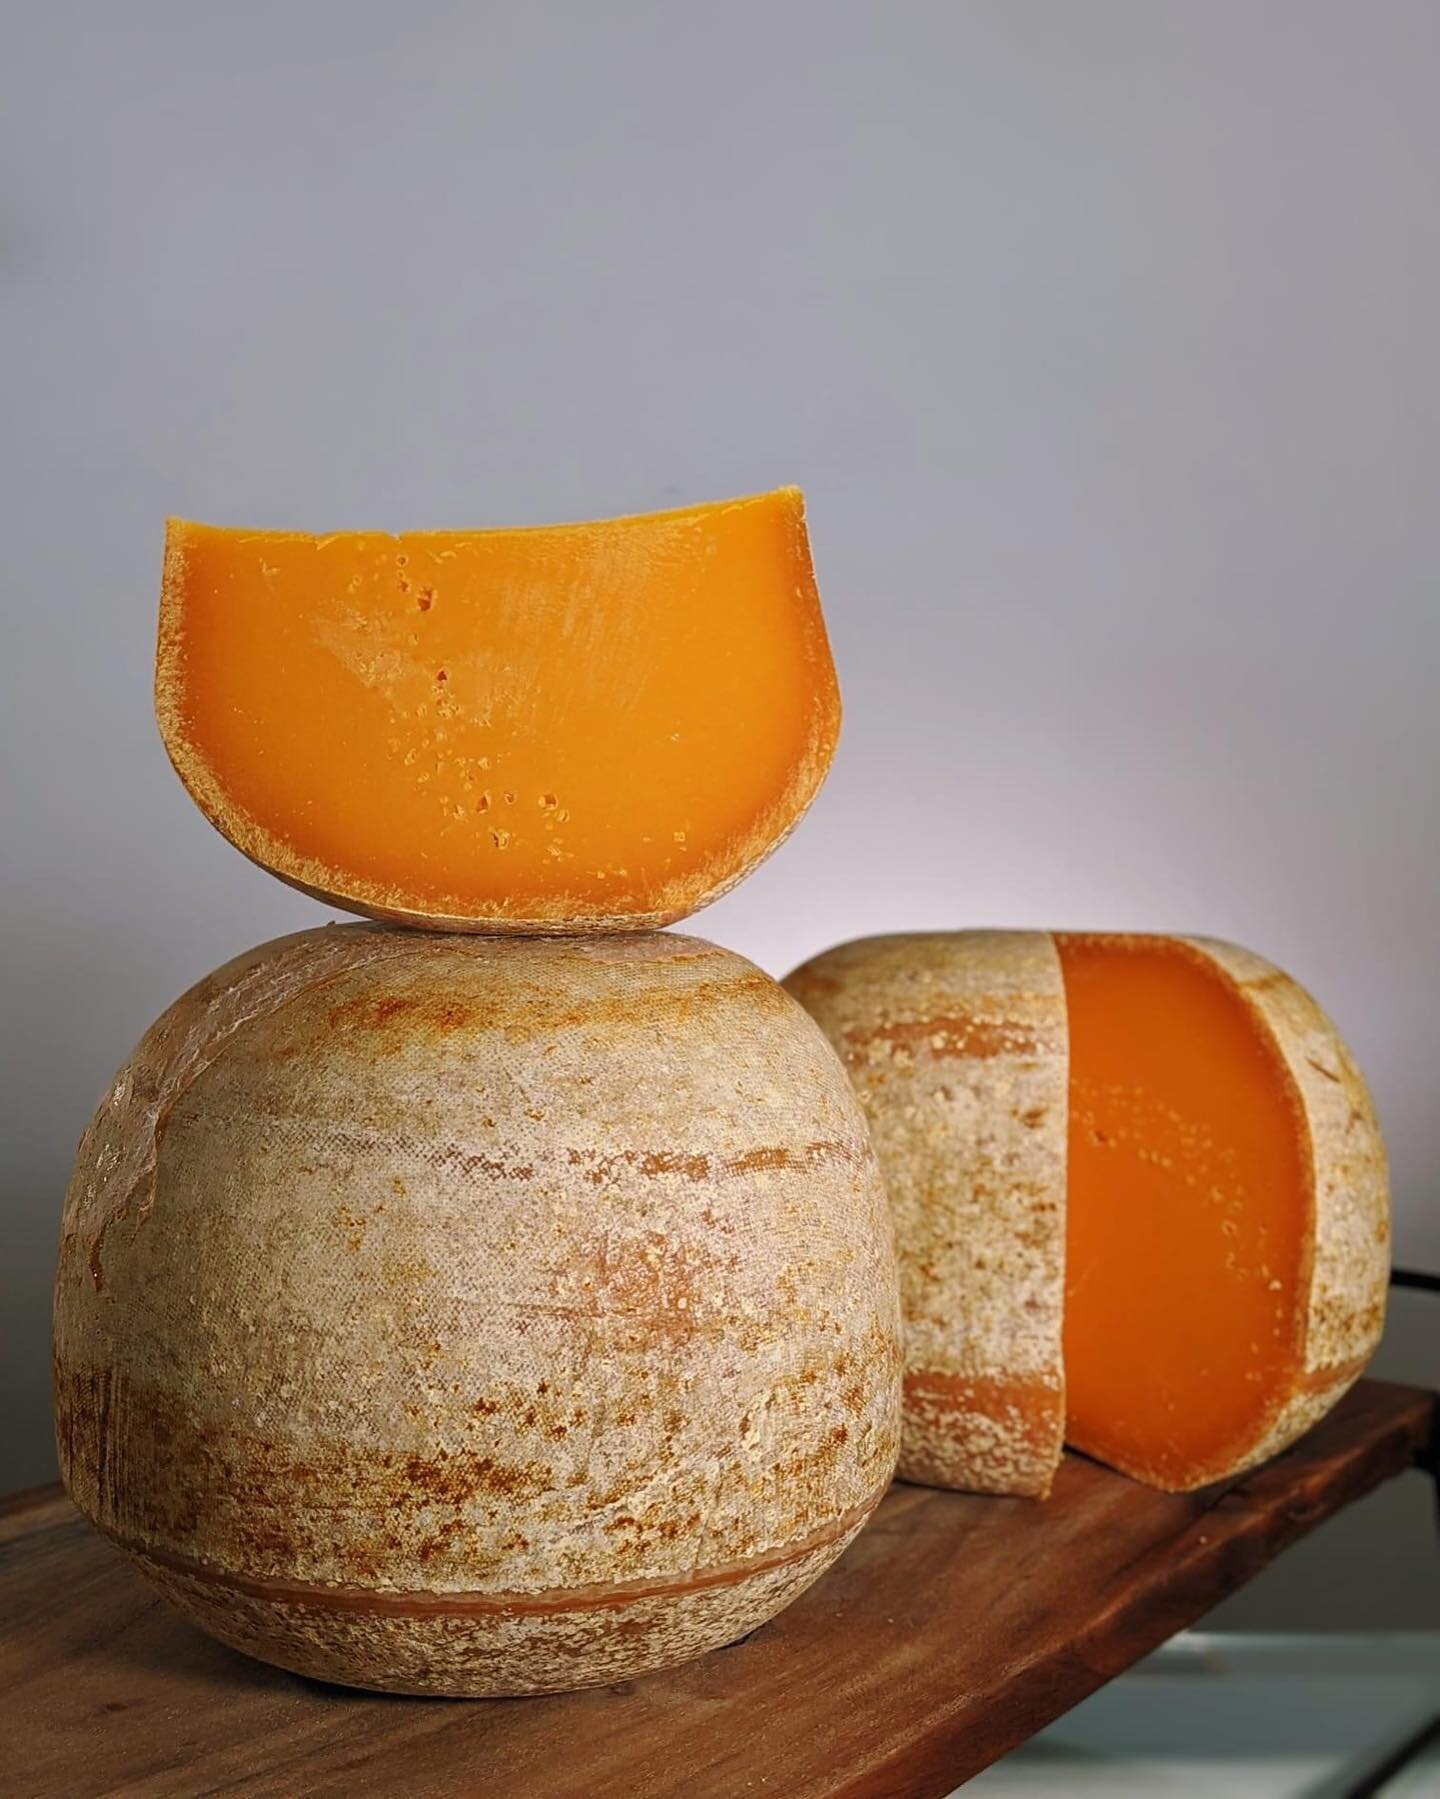 French Mimolette was originally inspired by the Dutch cheese, Edam. The natural rind of aged Mimolette is from mites that are added to the outside of the cheese giving it a rough texture and appearance as well as an enhanced flavour. 🤔

Come try thi